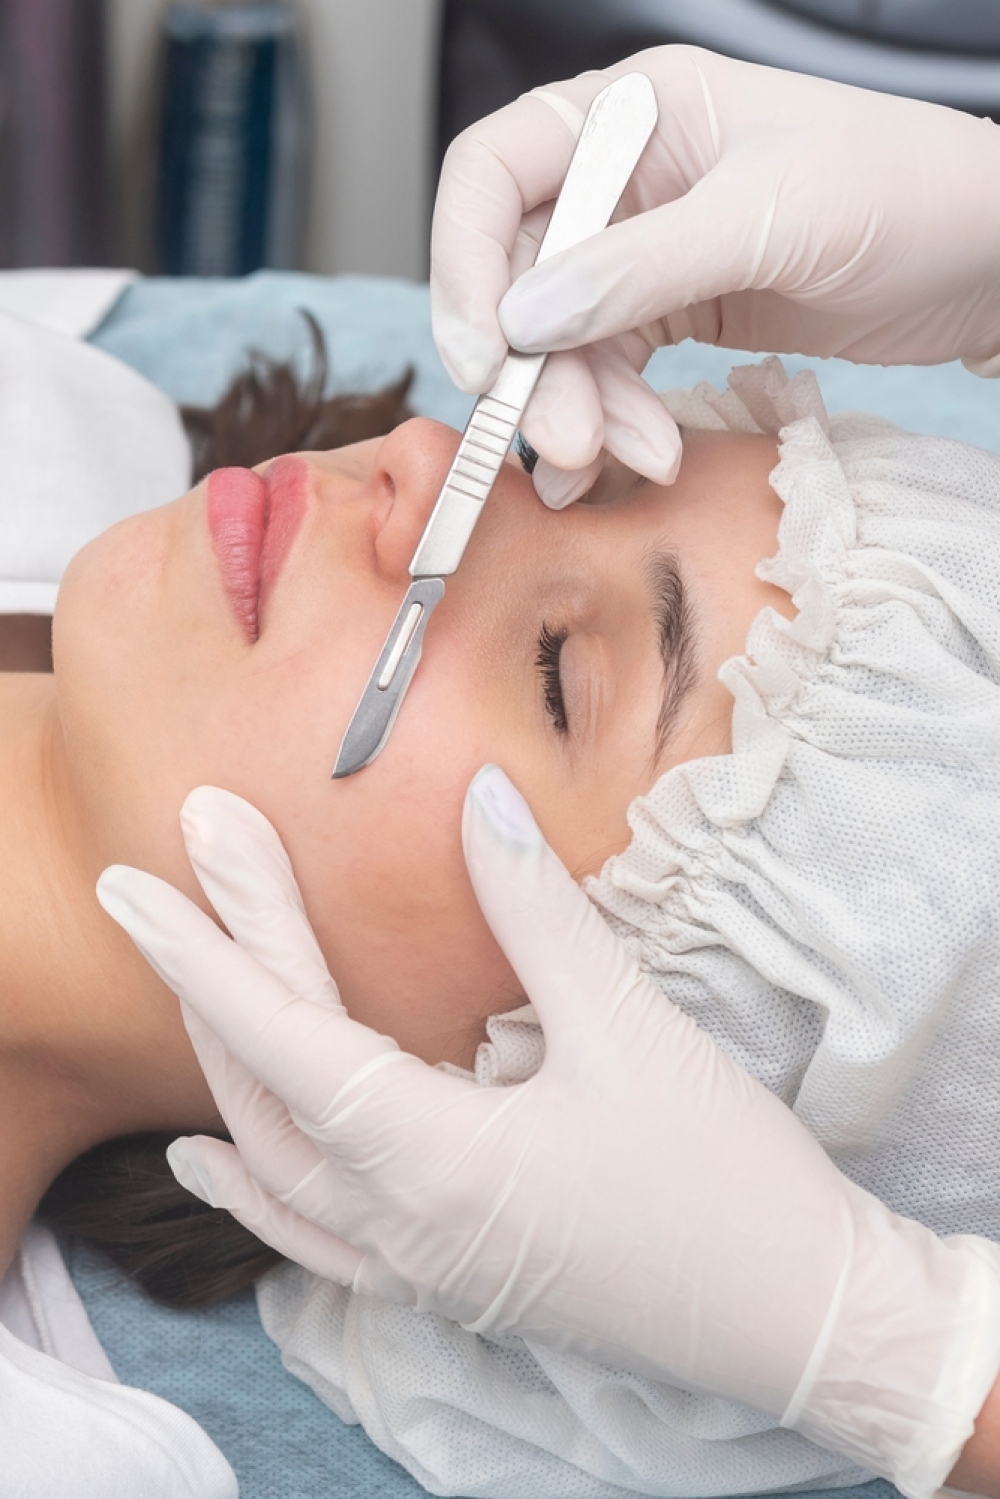 removing dead skin cells and peach fuzz with med spa dermaplaning - U R Royalty Med Spa - Cypress, Texas